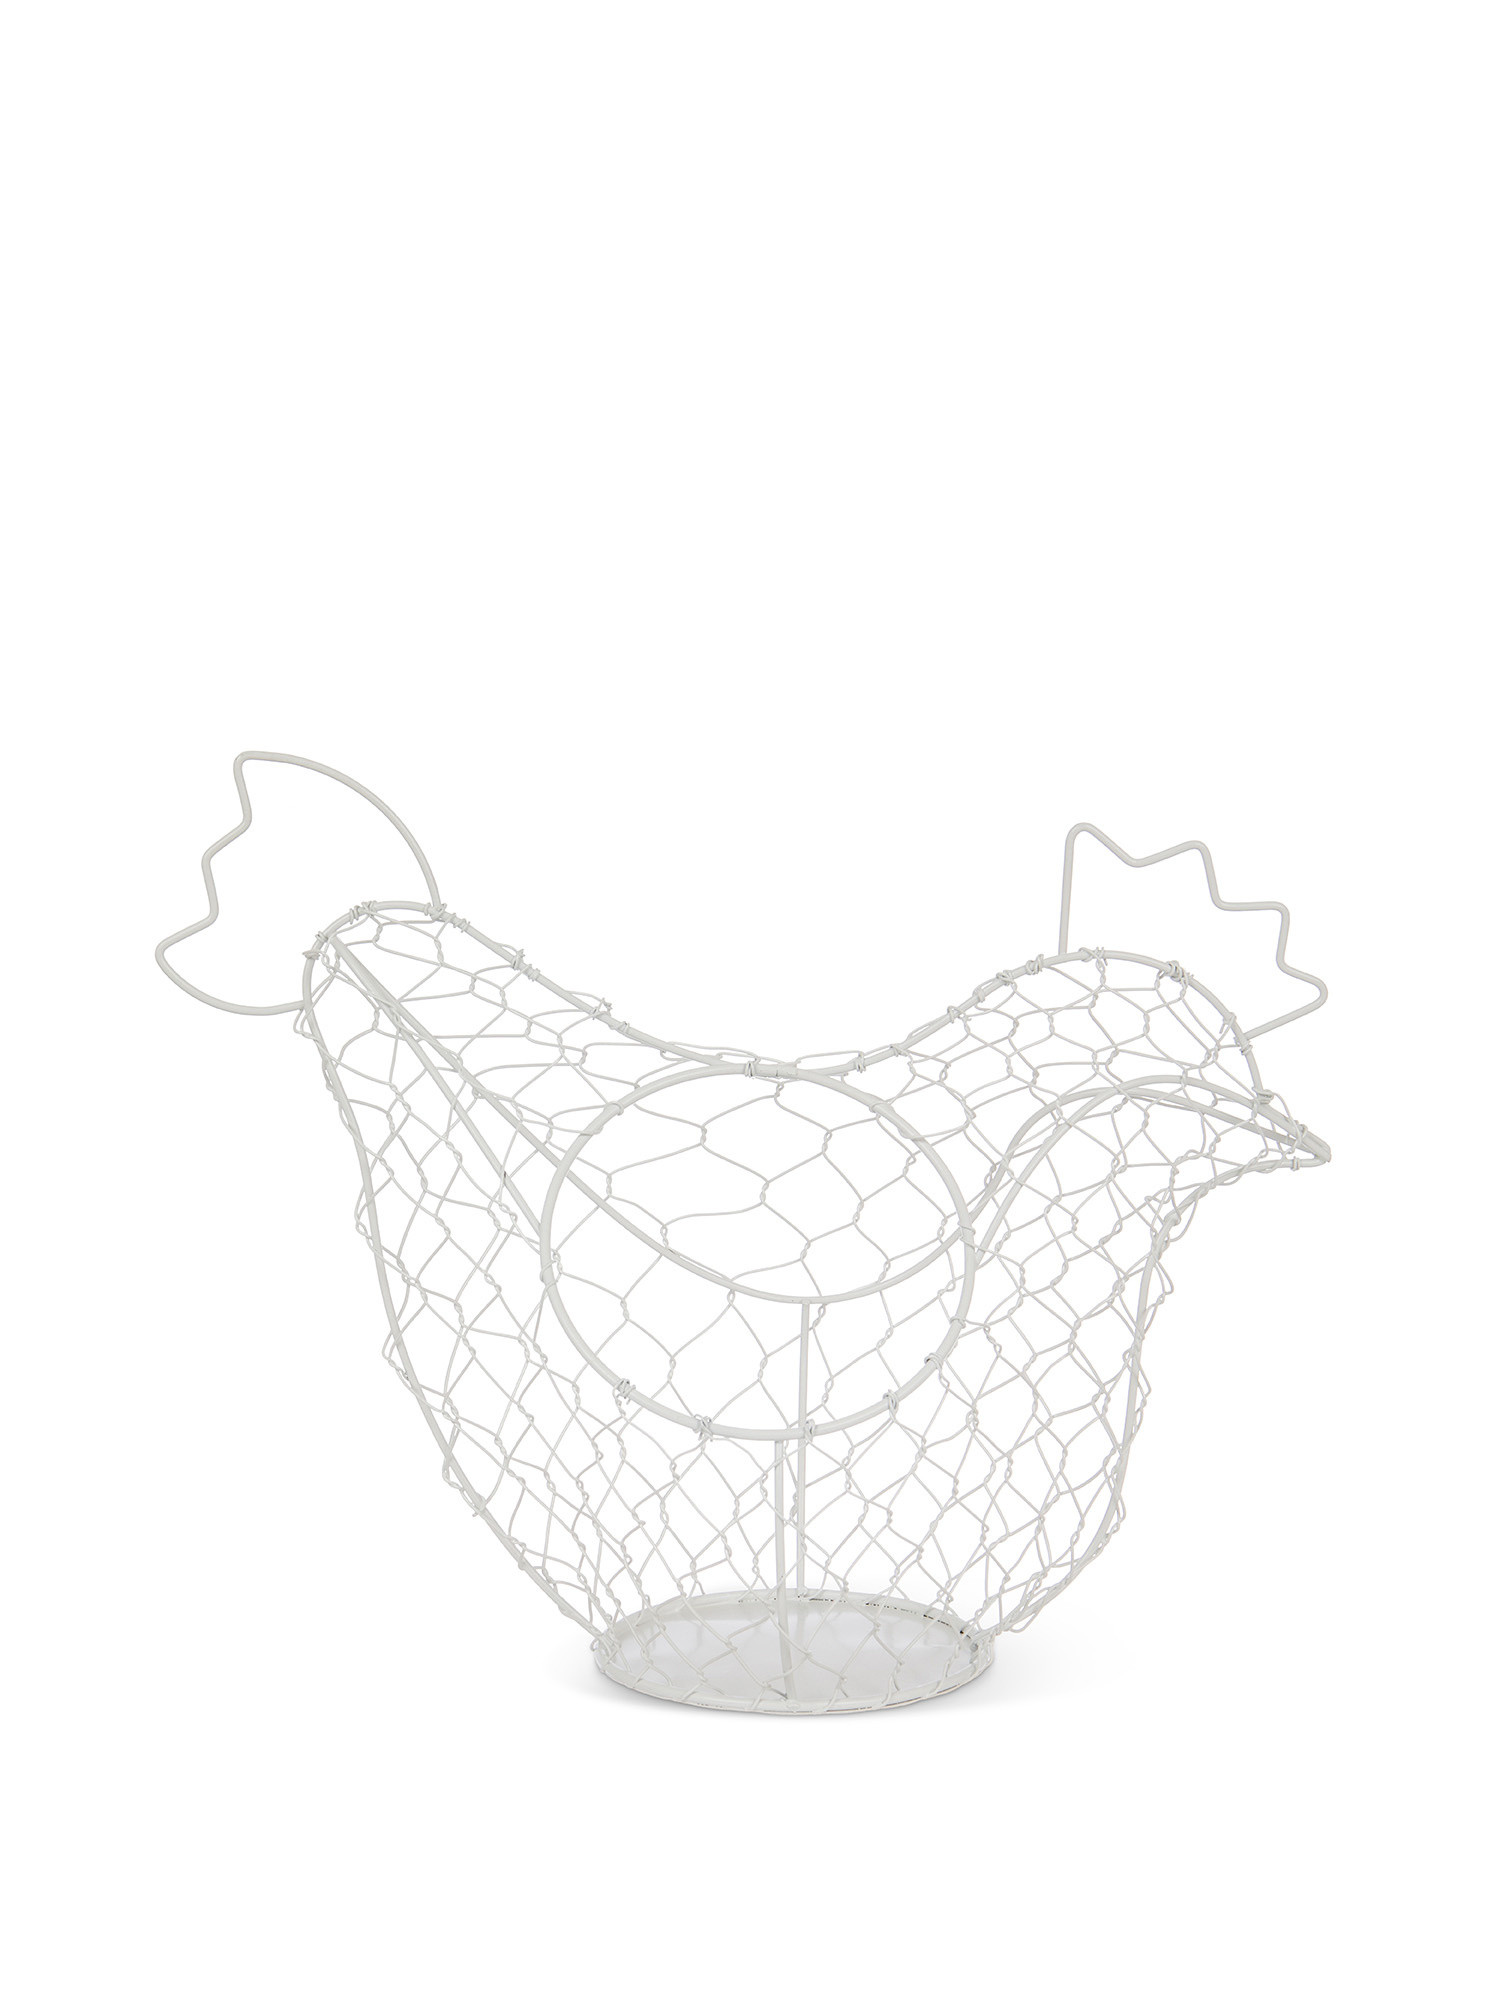 Chicken egg holder with white thread, White, large image number 0